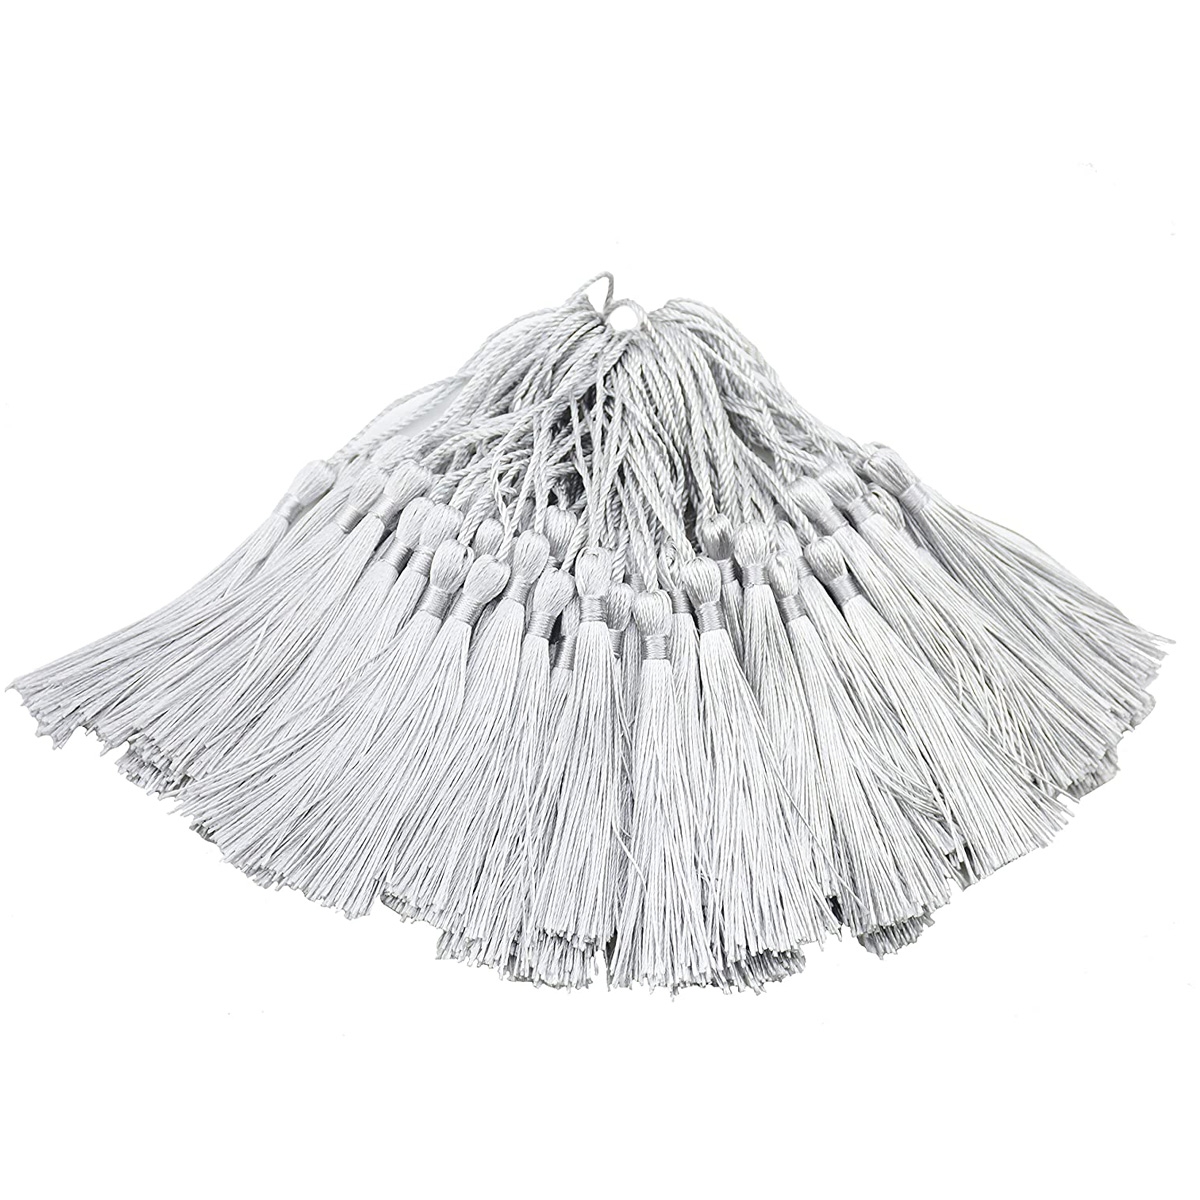 5 Inches Handmade Silky Floss Soft Craft Bookmark Tassels with Loops for DIY, Jewelry (Silver)